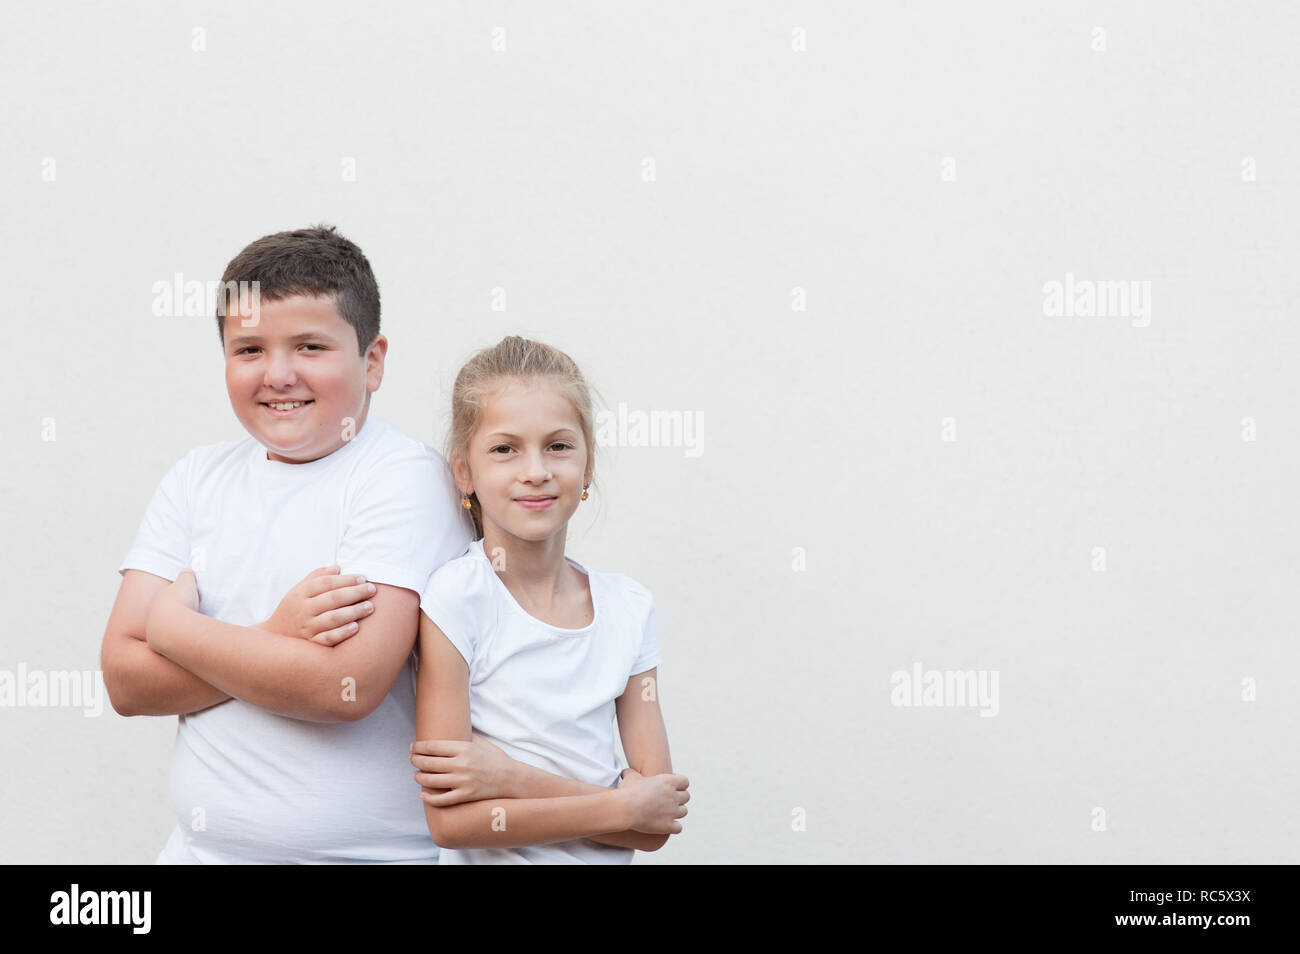 happy cute thick young boy shoulder to shoulder with very thin little pretty girl in white shirt with copyspace Stock Photo